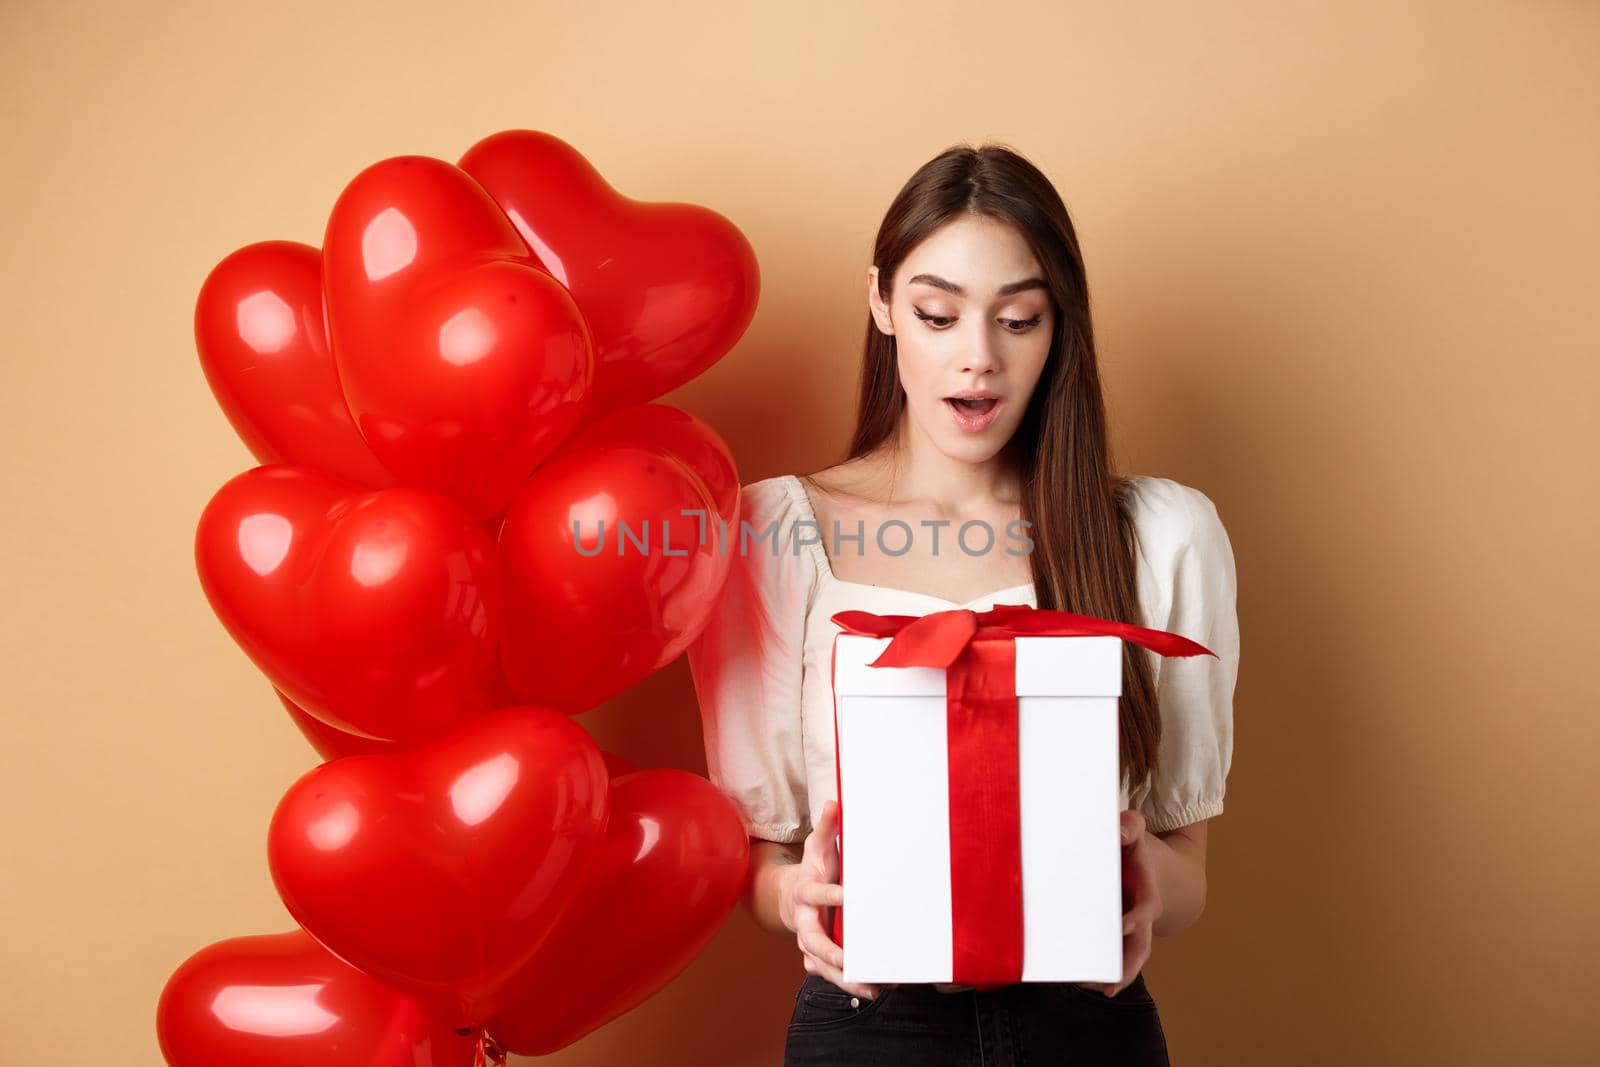 Surprised beautiful woman in romantic outfit, standing near heart balloons and looking at her gift on Valentines day, standing on beige background.